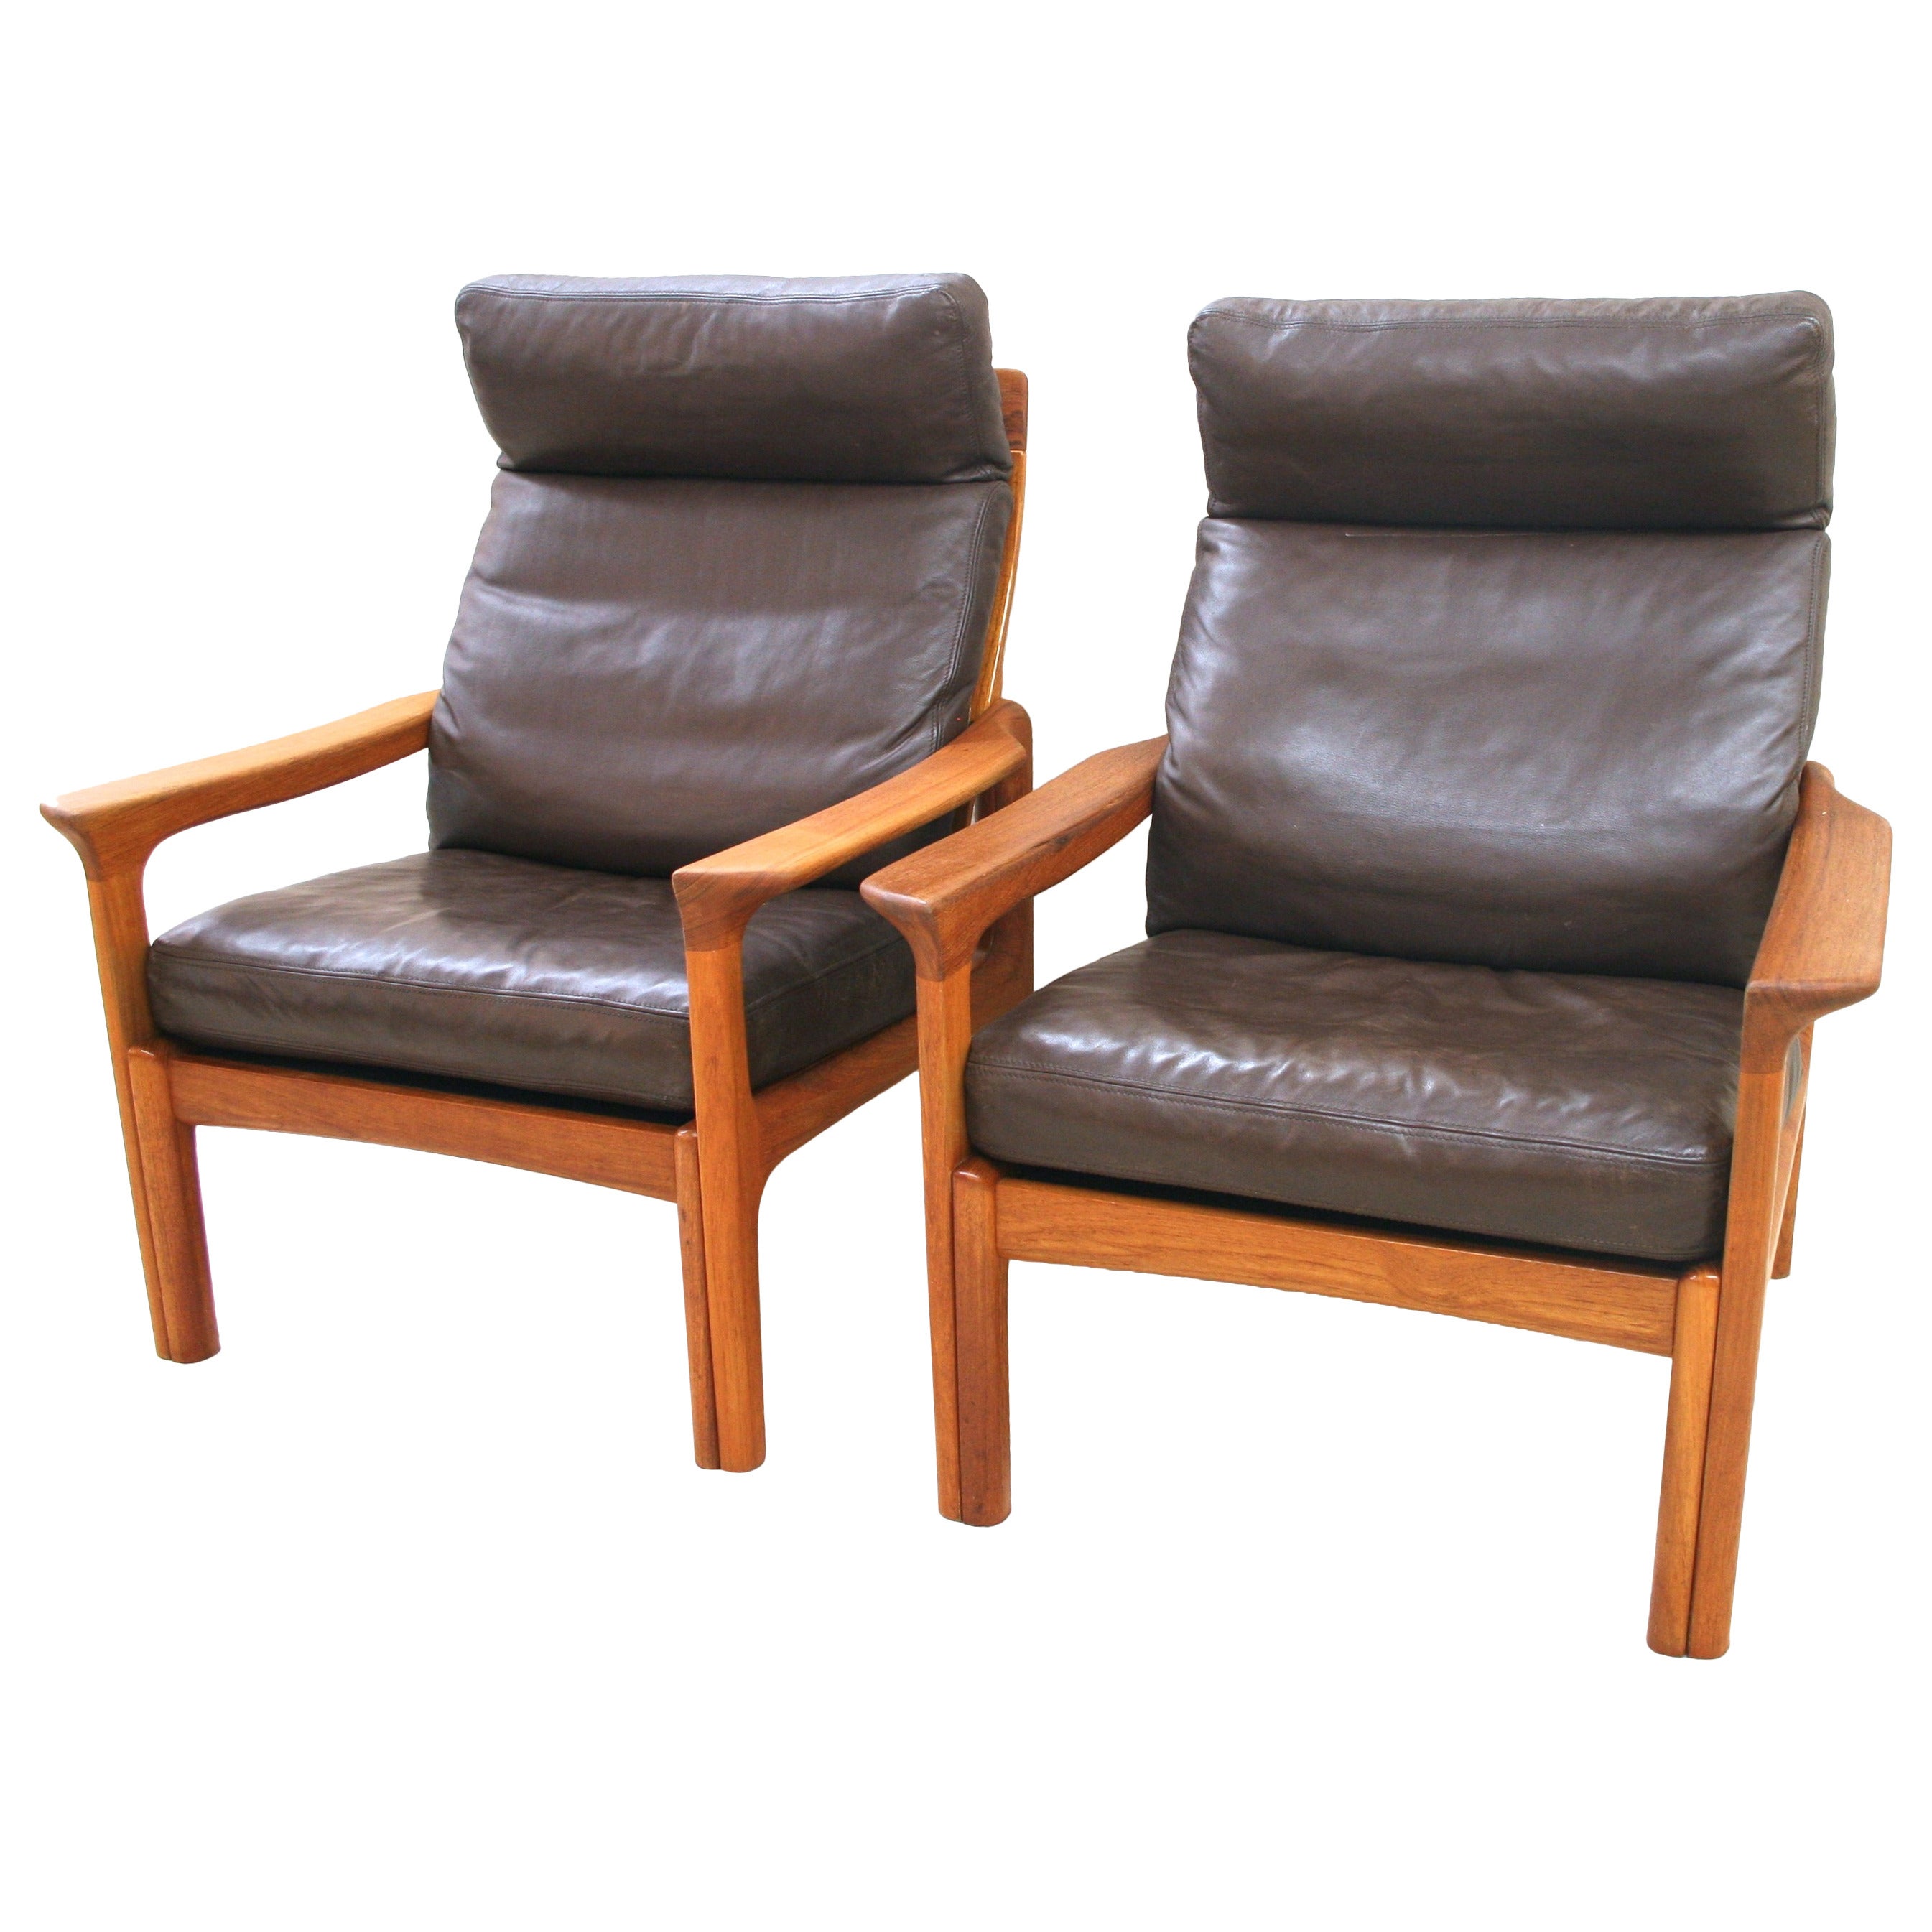 Pair of Teak and Leather Danish Modern High Back Lounge Chairs, circa 1970 For Sale